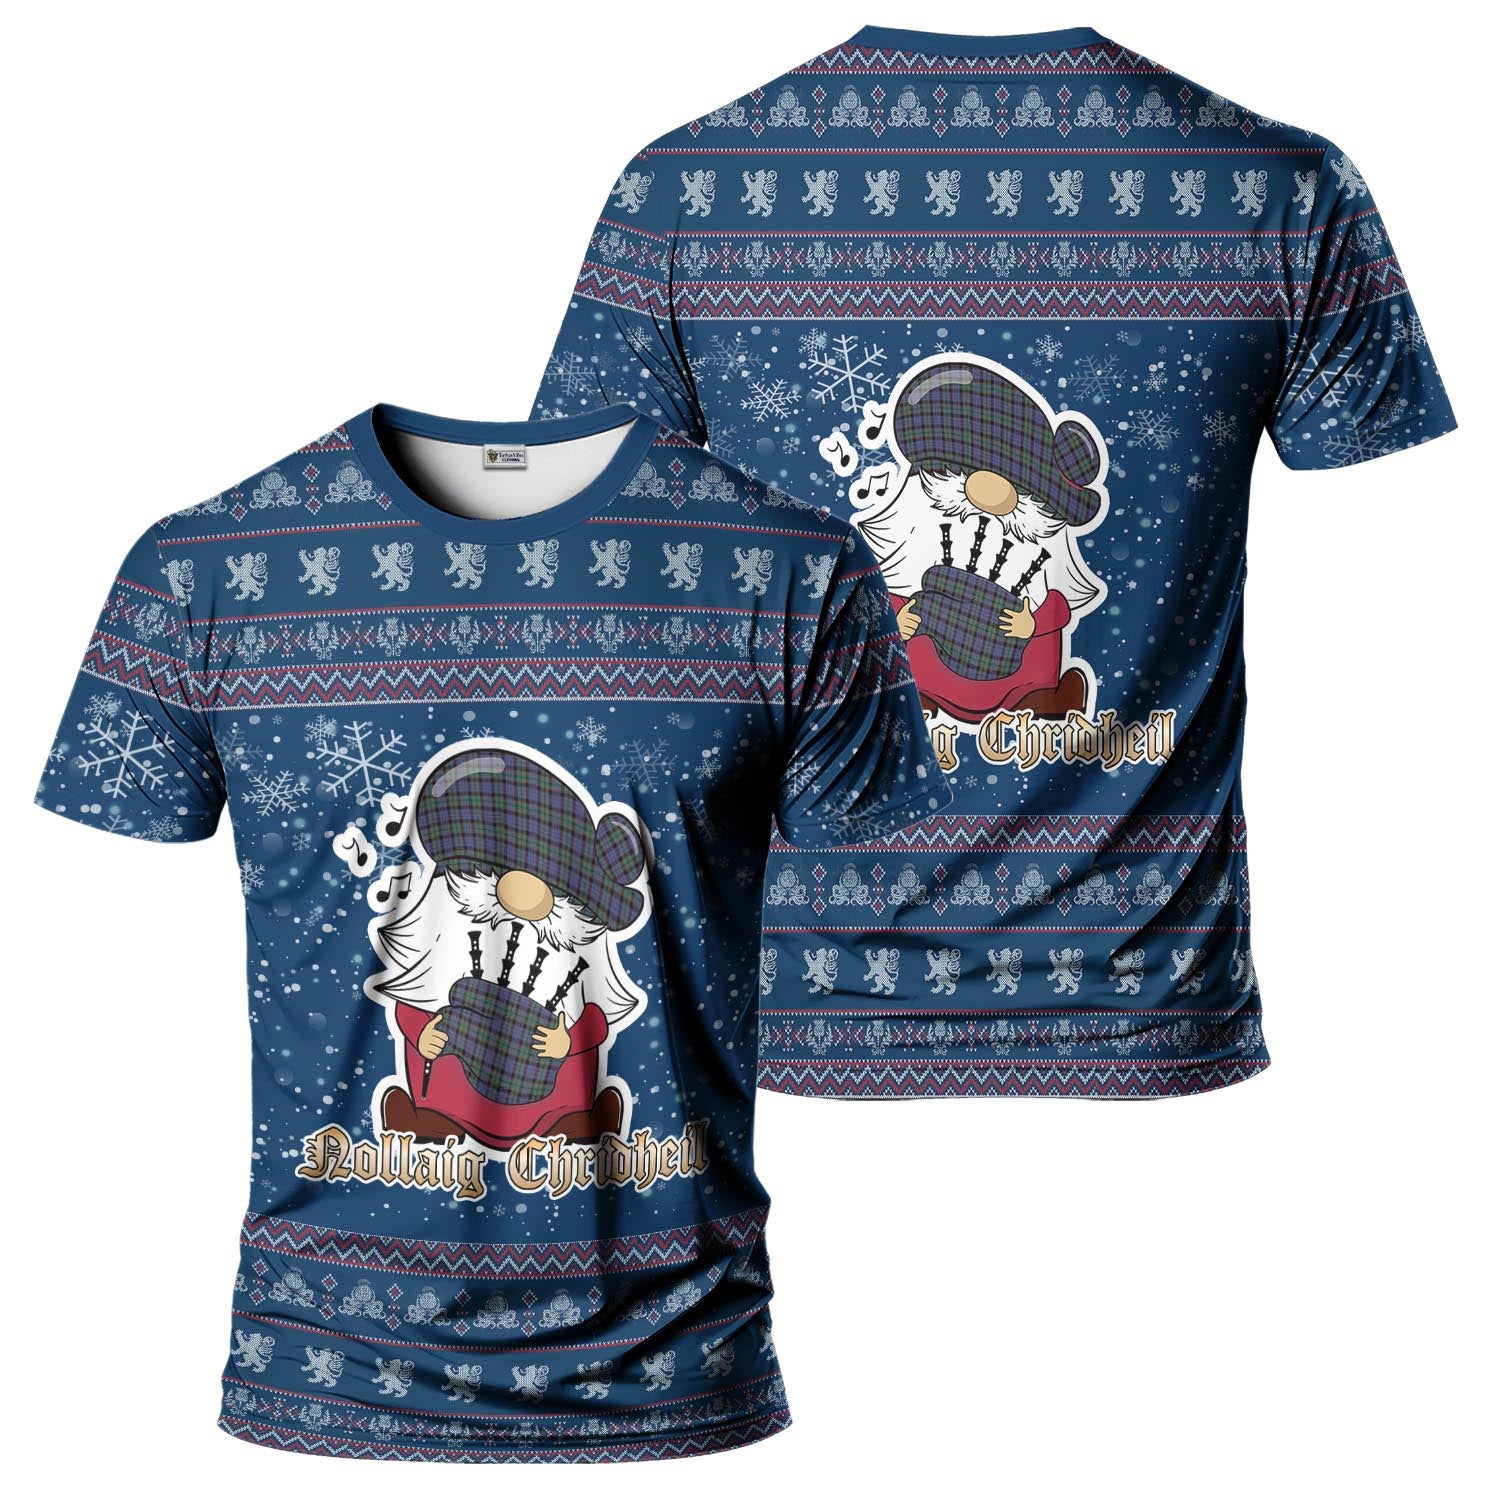 Fletcher Modern Clan Christmas Family T-Shirt with Funny Gnome Playing Bagpipes Kid's Shirt Blue - Tartanvibesclothing